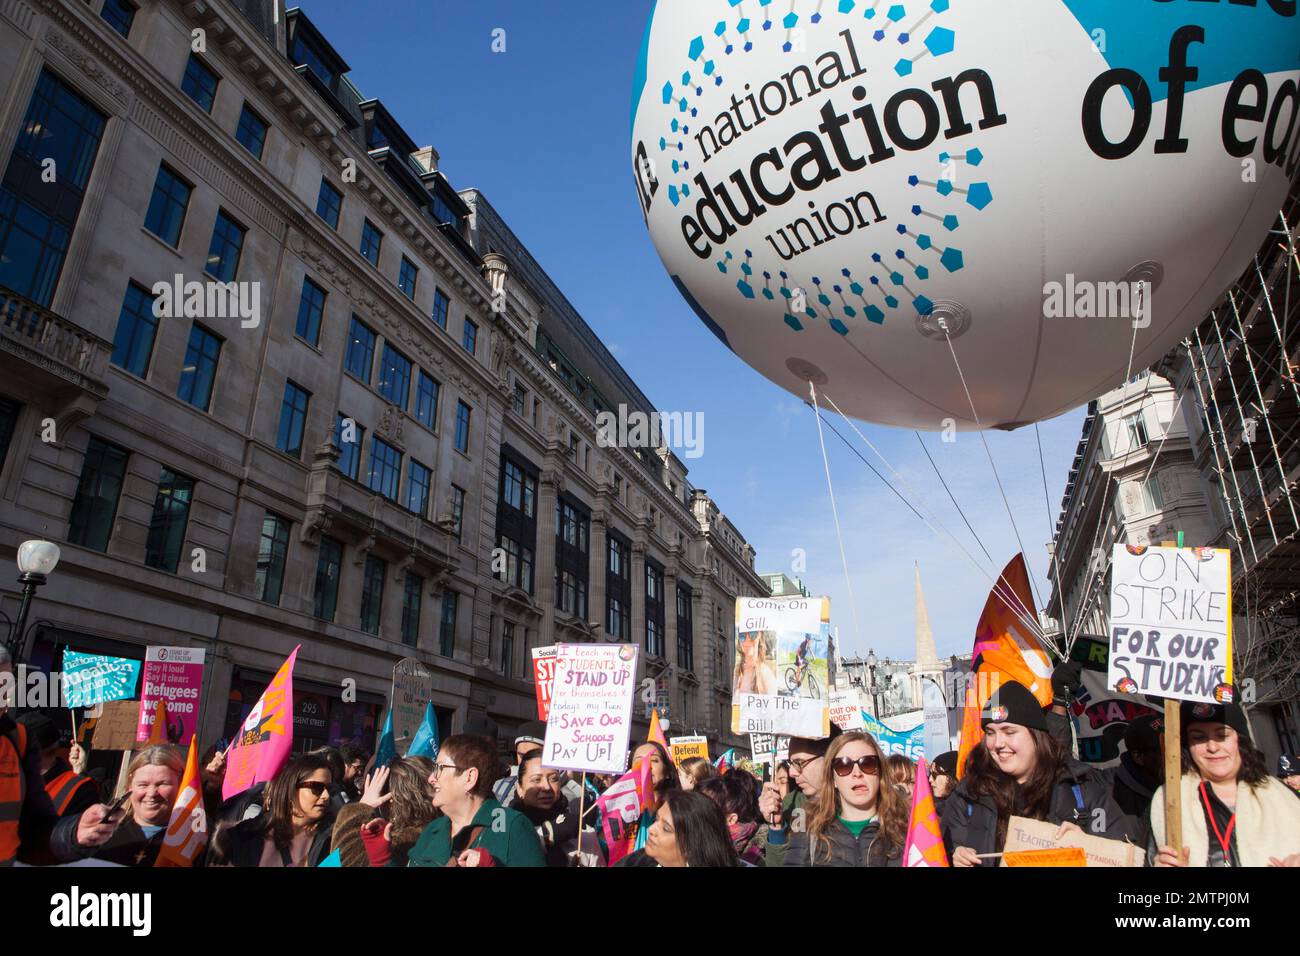 London, UK, 2 February 2023: Central London was brought to a standstill as over 30,000 teachers, university staff, FE tutors and allies from other unions marched from Portland Place to Whitehall. Many schools are shut to most pupils today and tomorrow as industrial action takes place in a protest about pay, pensions and working conditions. Anna Watson/Alamy Live News Stock Photo